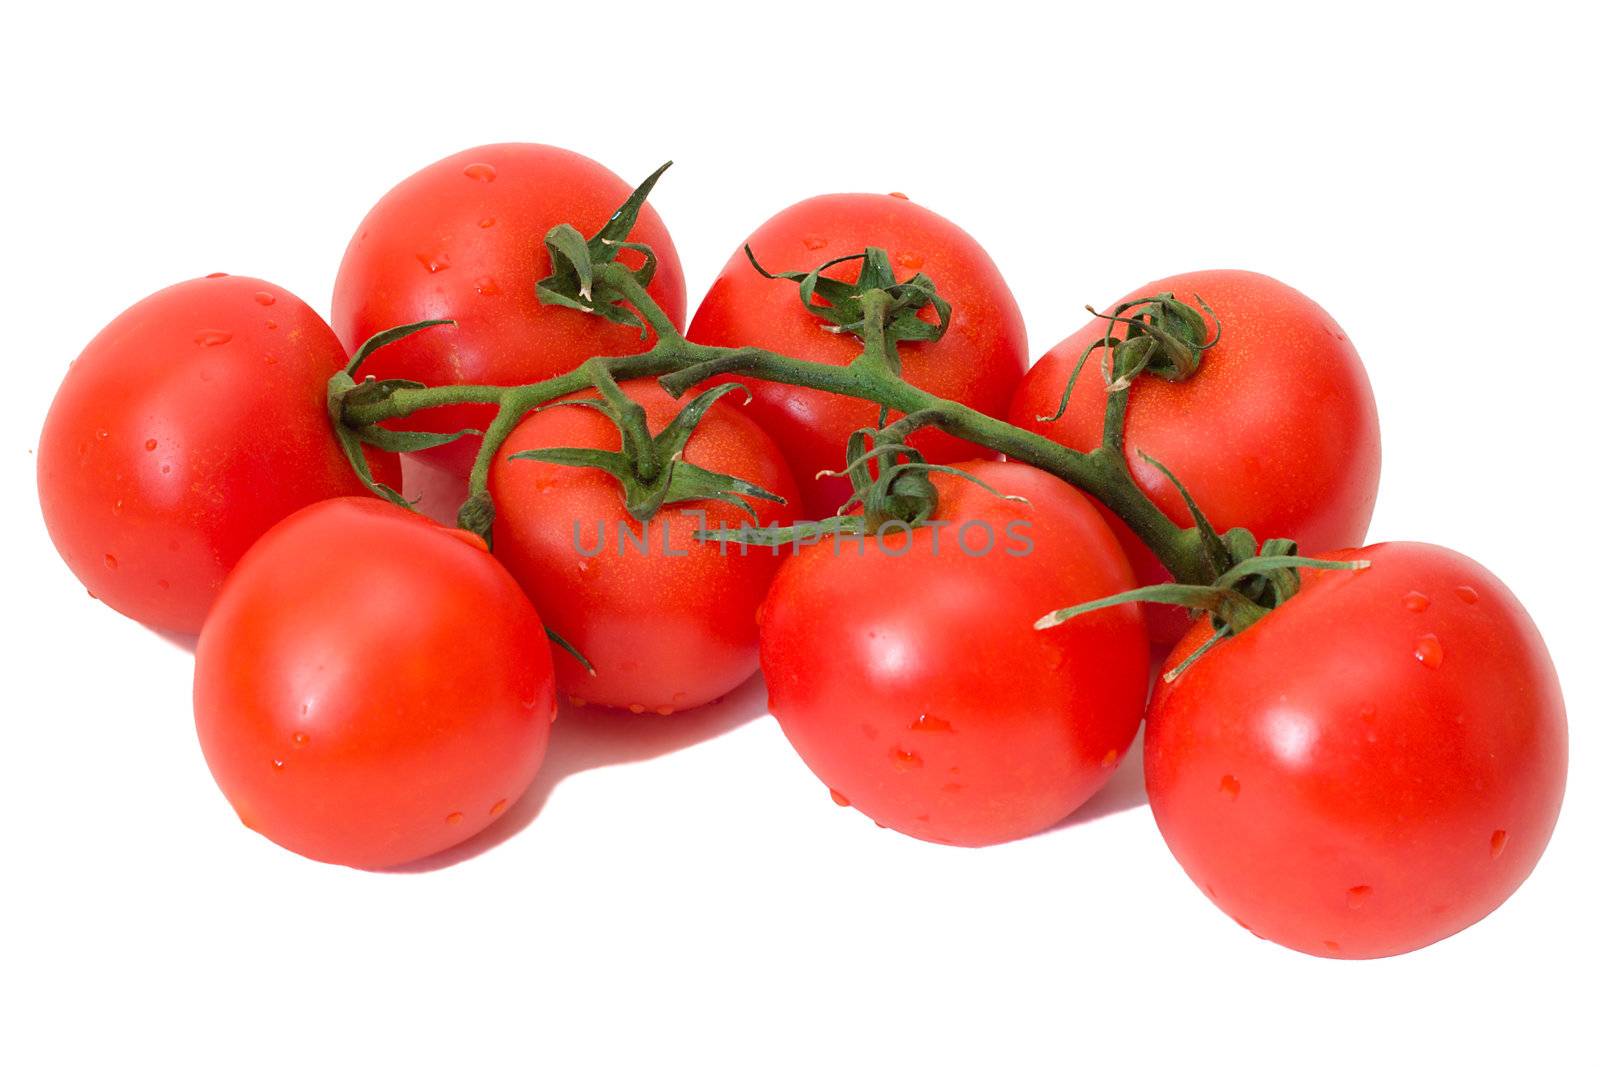 branch of tomatoes by Alekcey